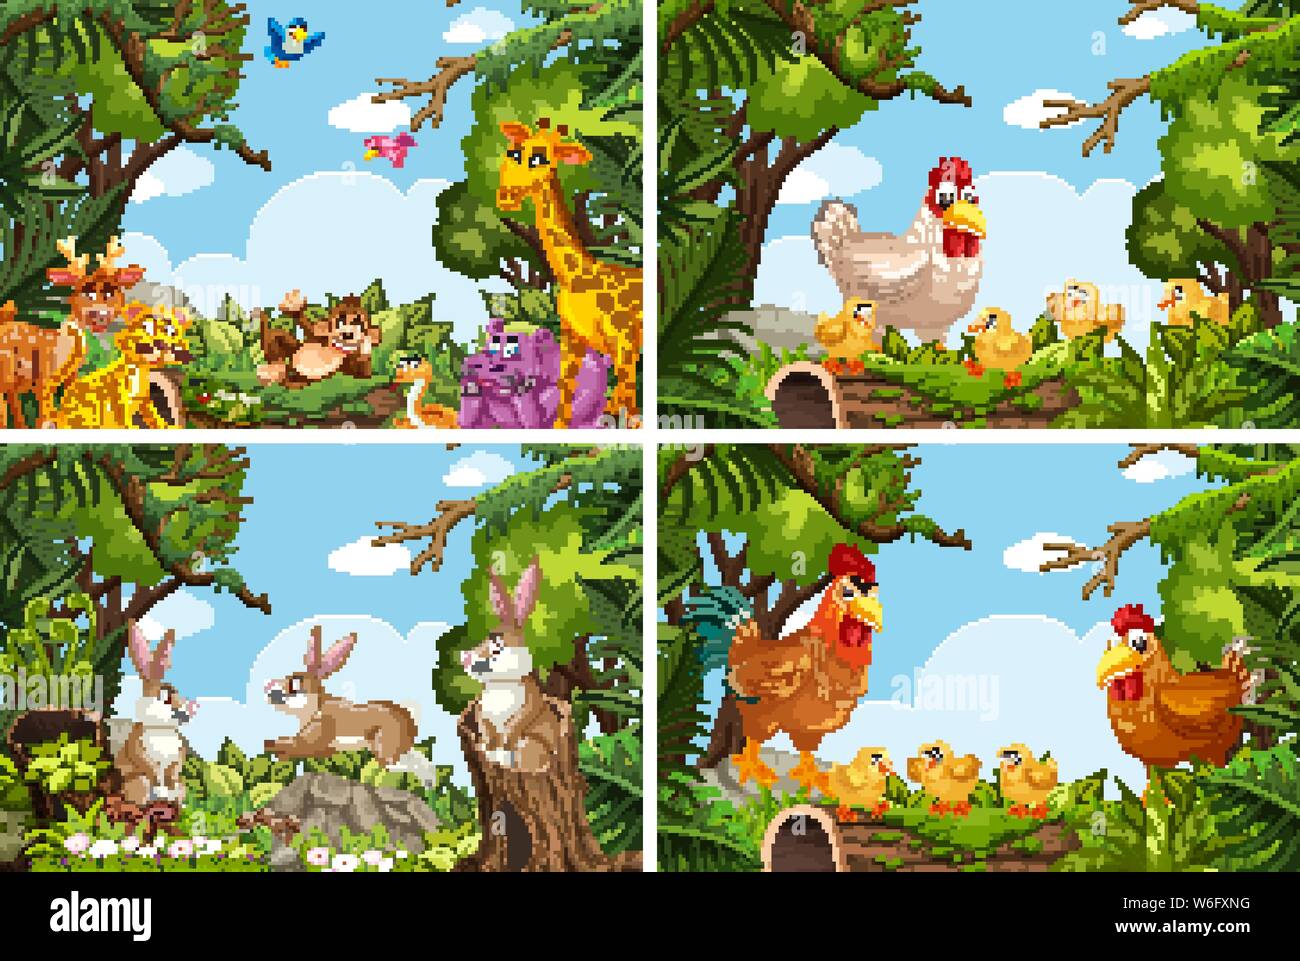 Set of various animals in nature scenes illustration Stock Vector